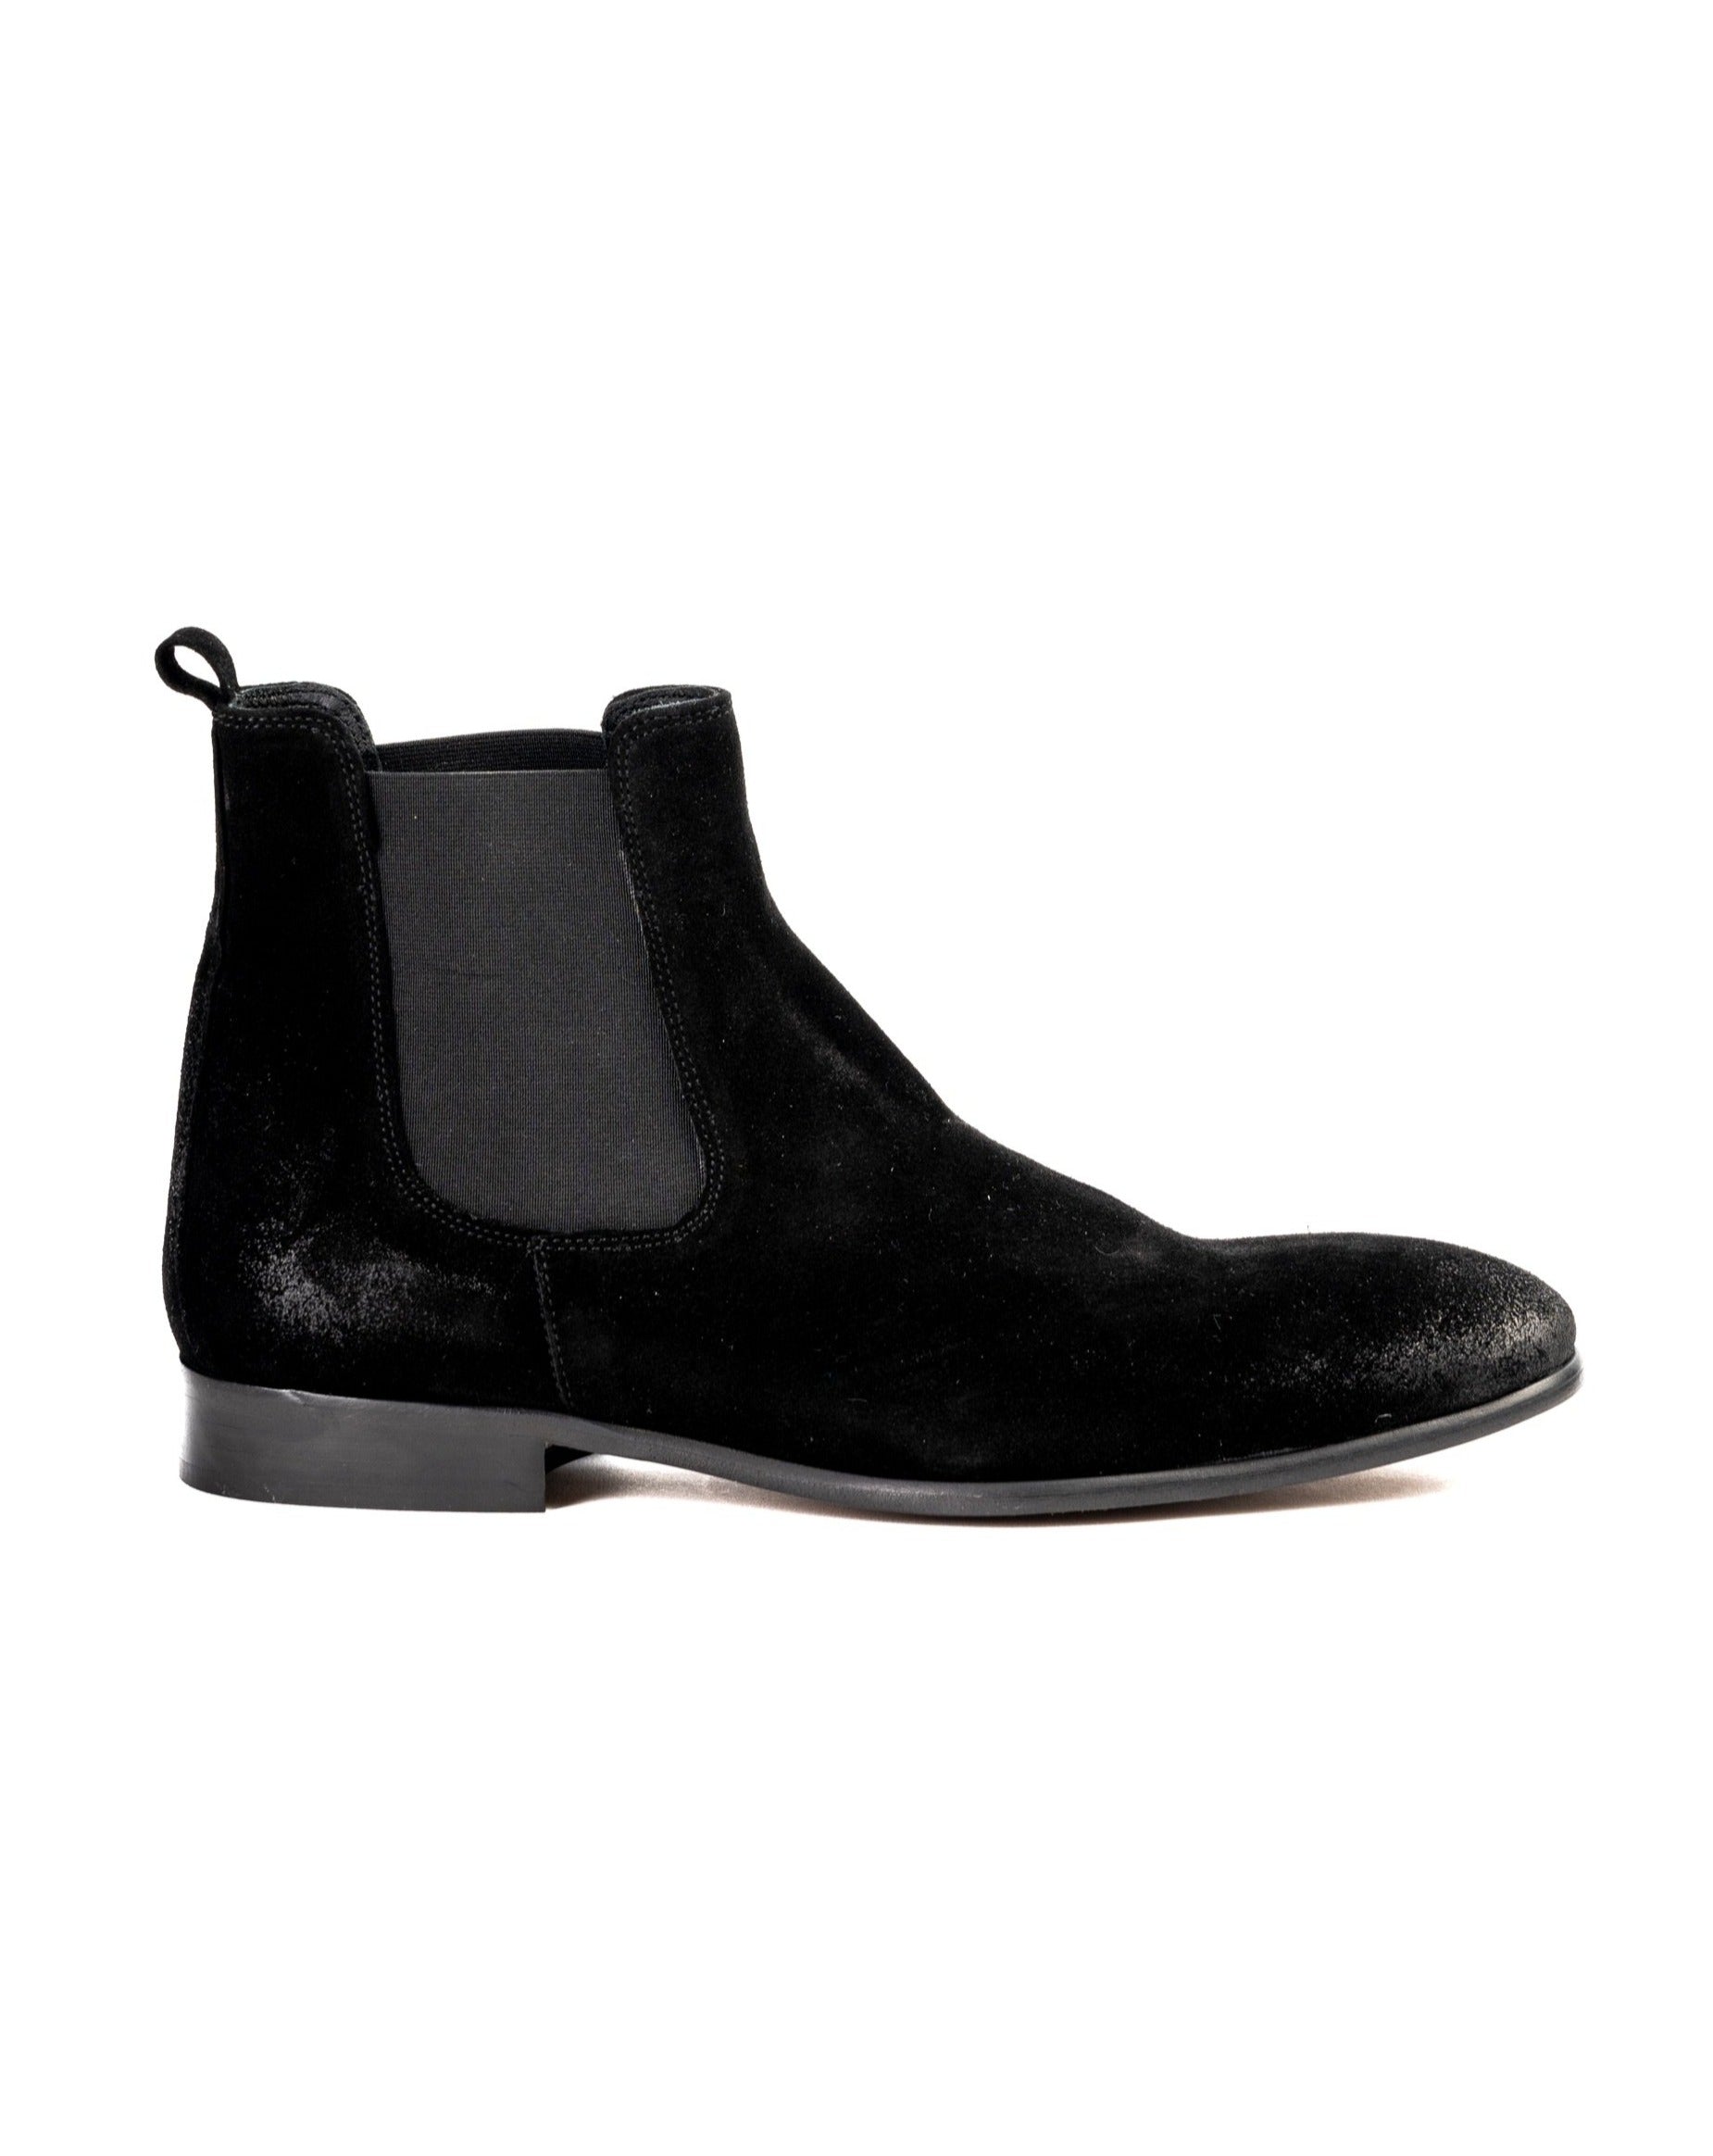 Dre - dirty black suede chelsea boots